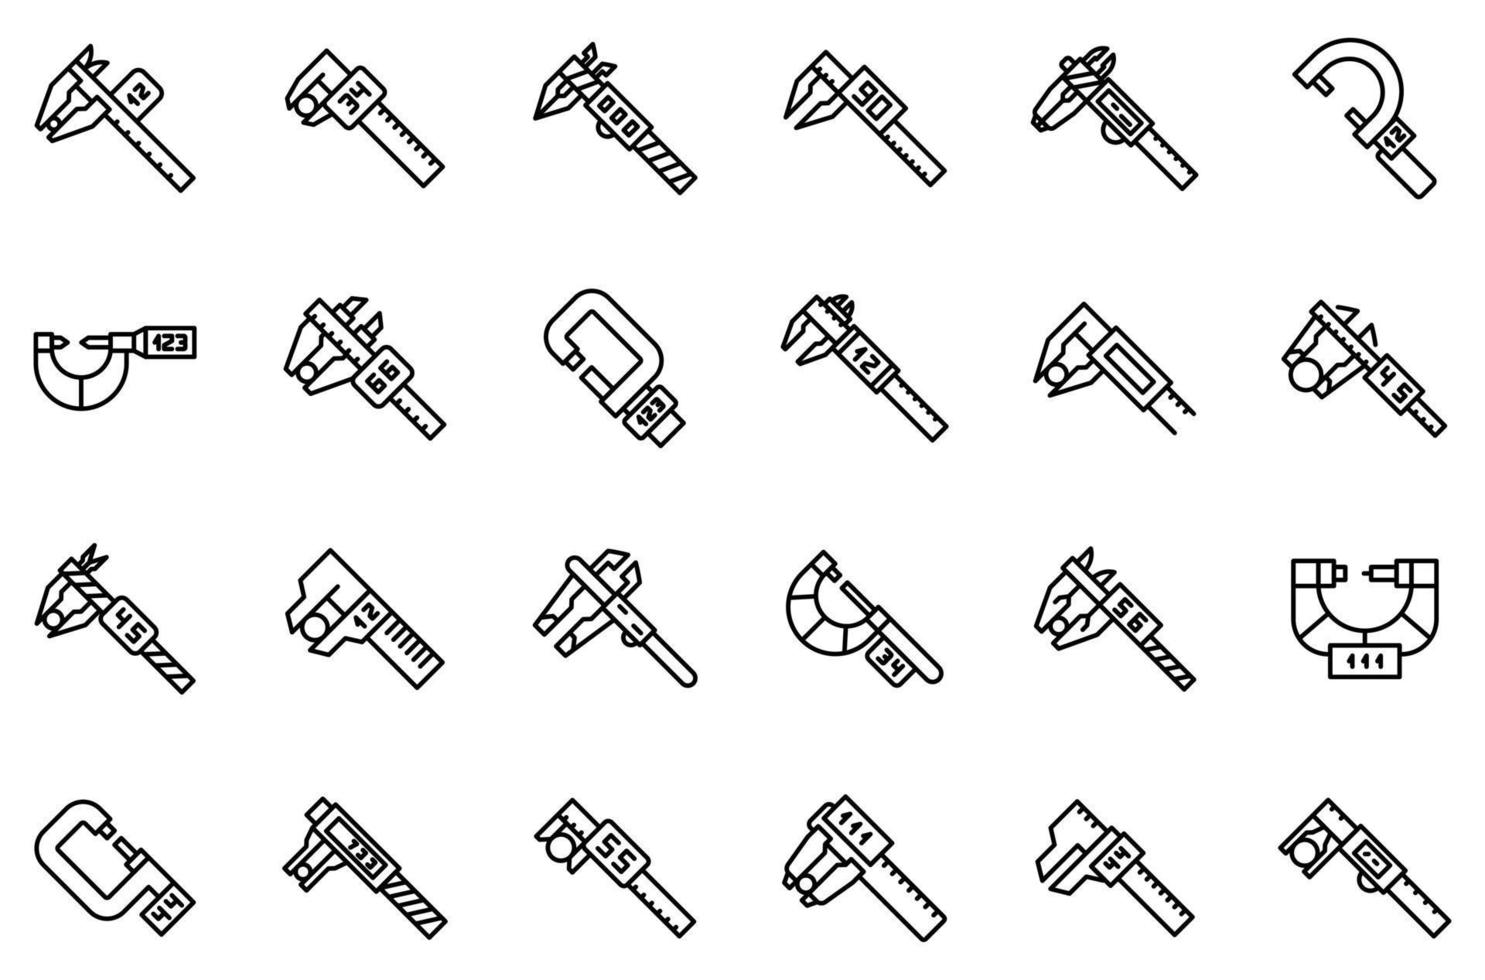 Digital micrometer icons set, outline style vector